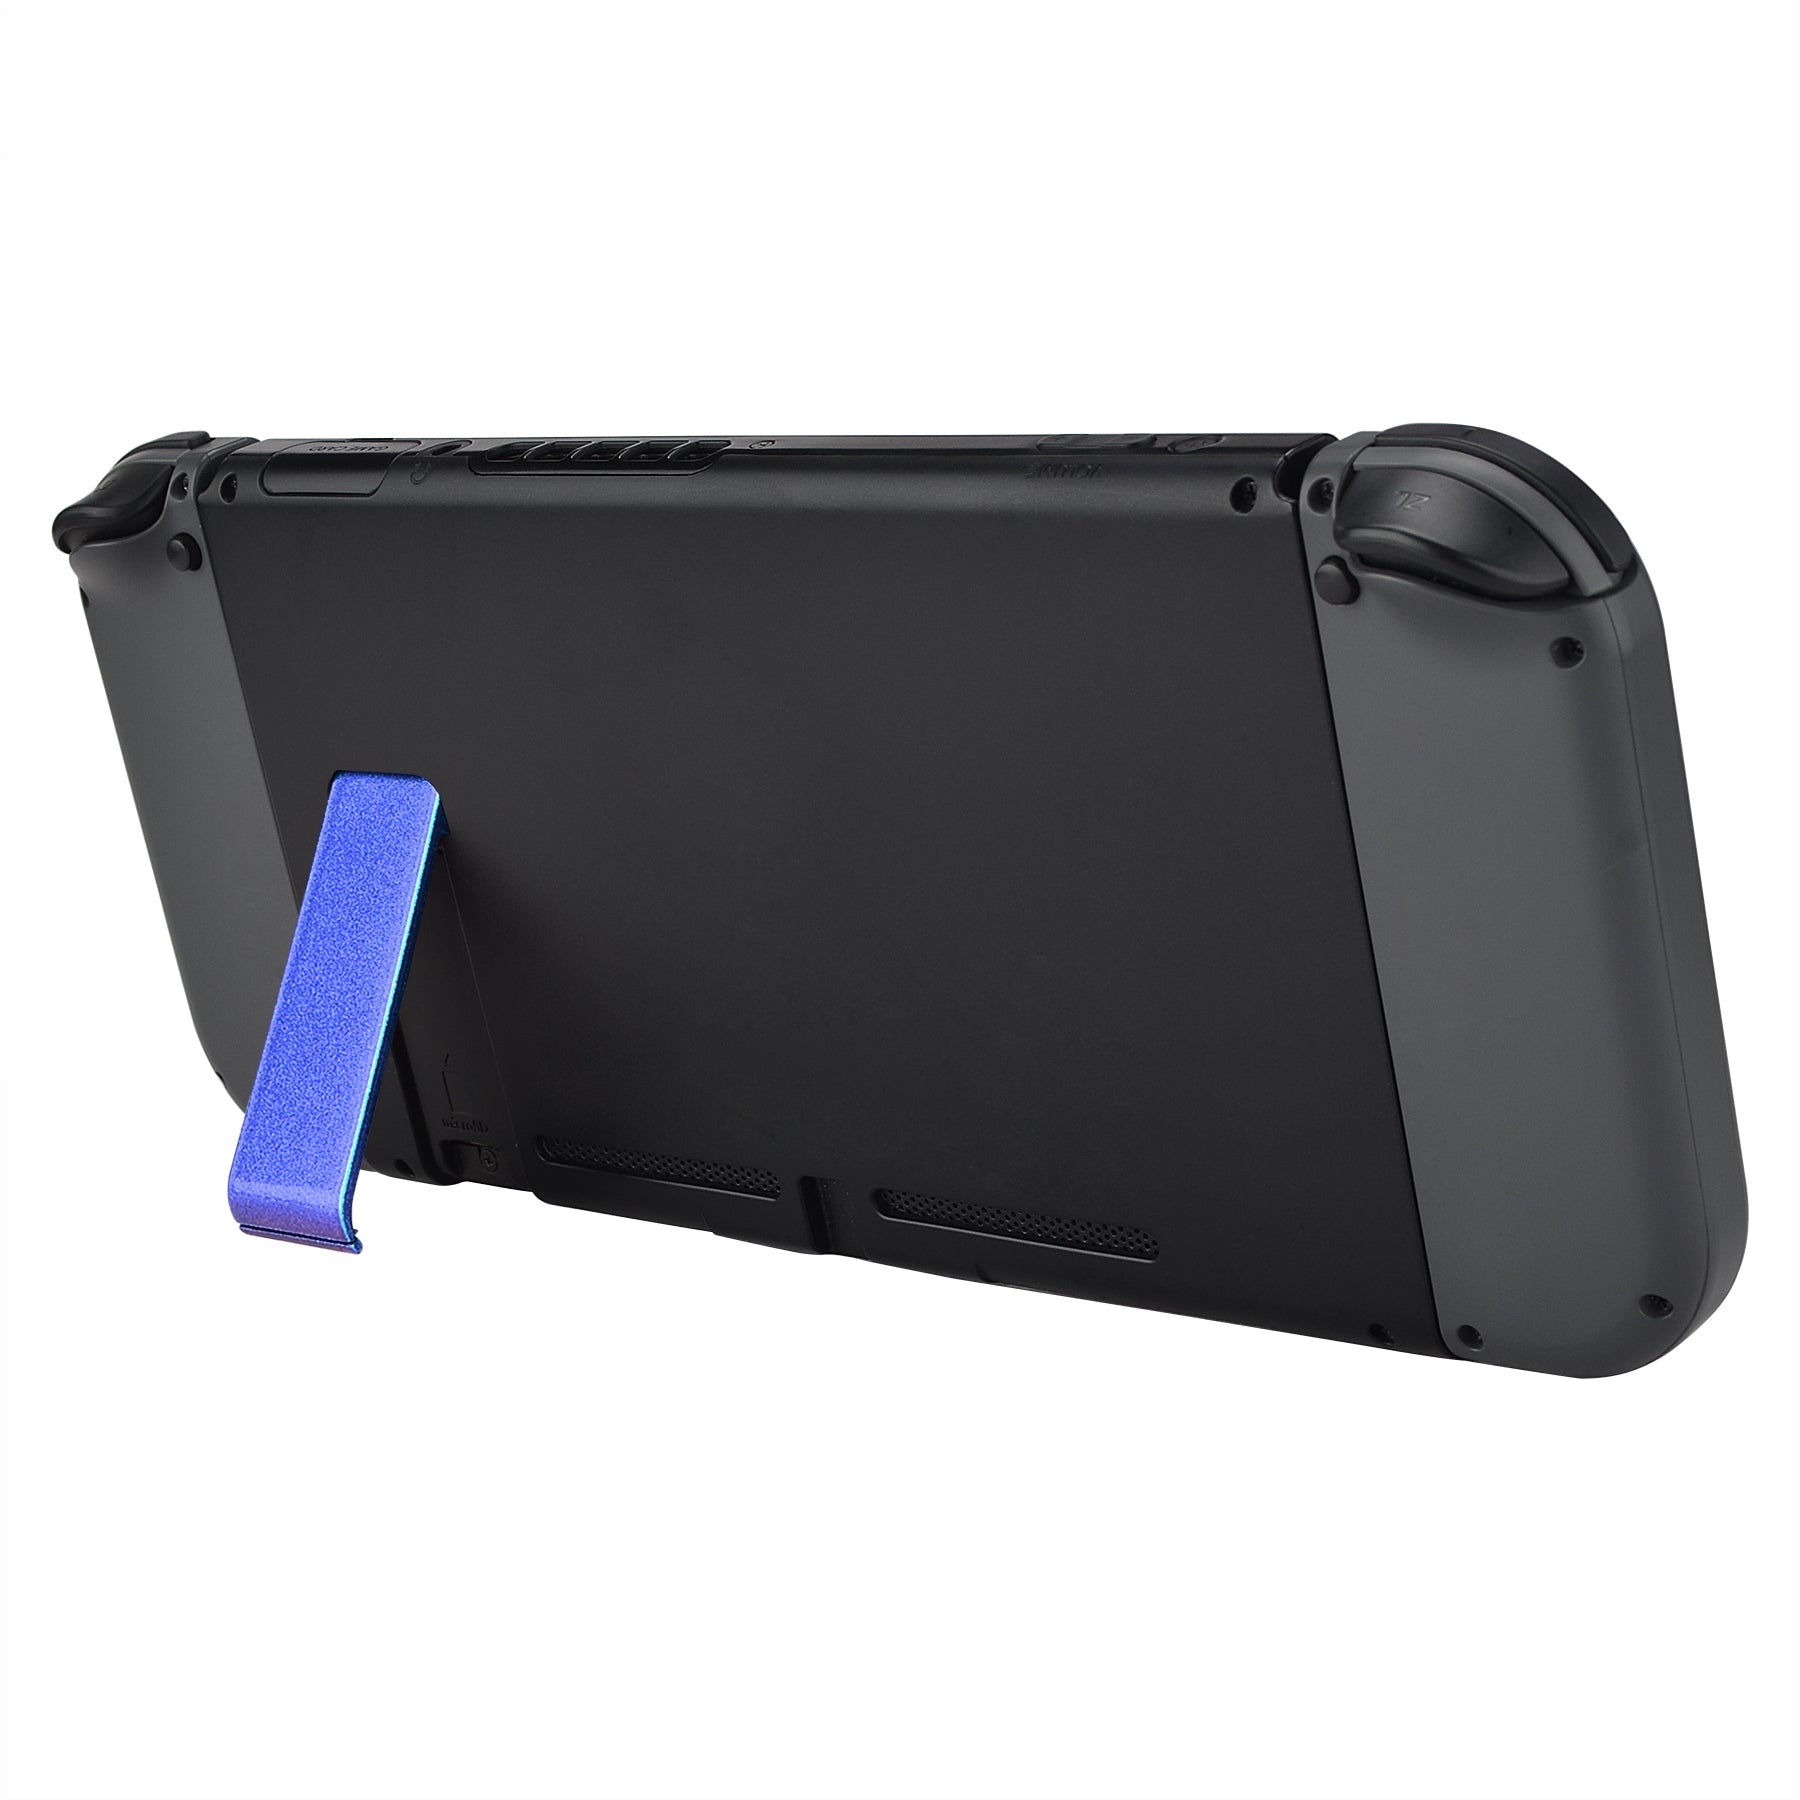 eXtremeRate Retail 2 Set of Chameleon Purple Blue Soft Touch Replacement Kickstand for Nintendo Switch Console, Back Bracket Holder Kick Stand for Nintendo Switch - Console NOT Included  - AJ413